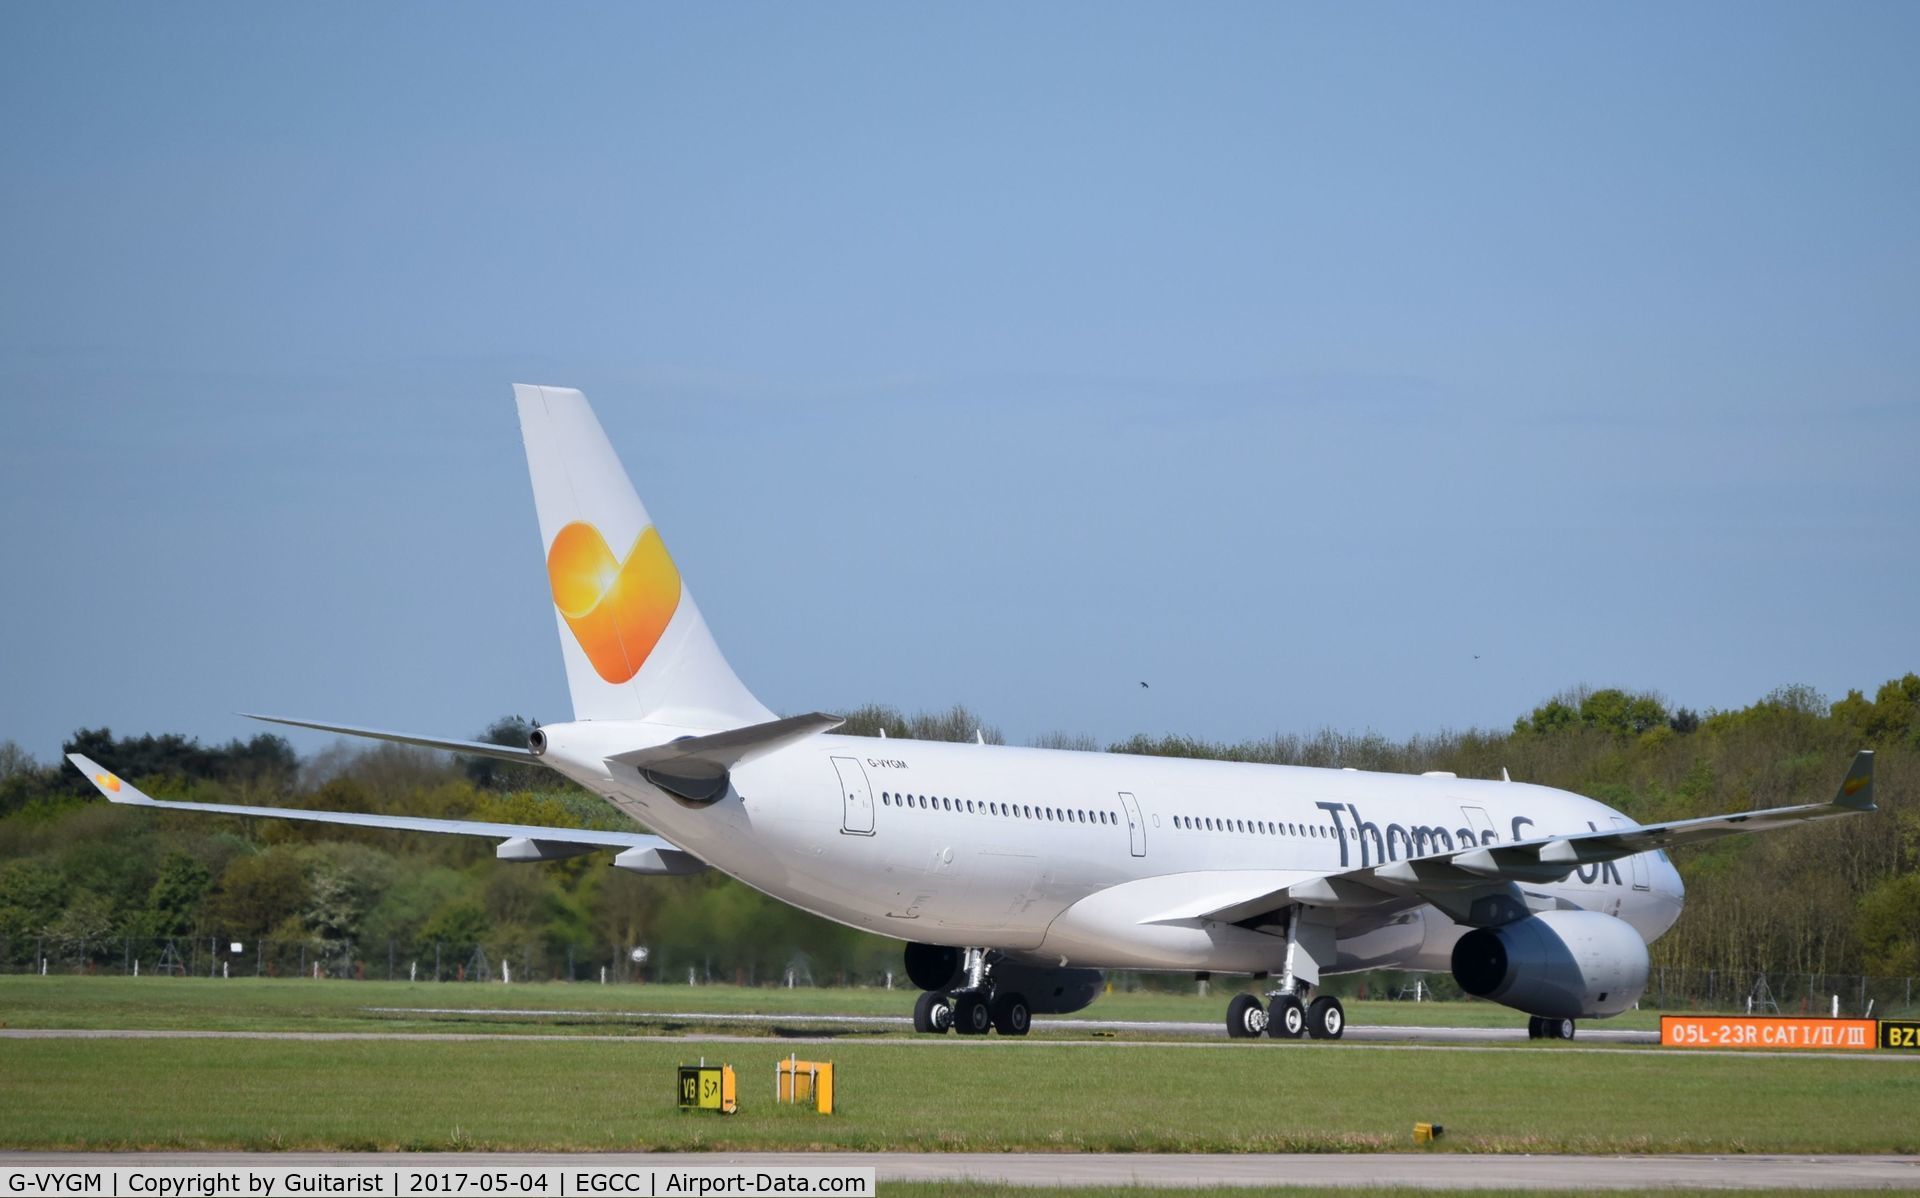 G-VYGM, 2015 Airbus A330-243 C/N 1601, At Manchester